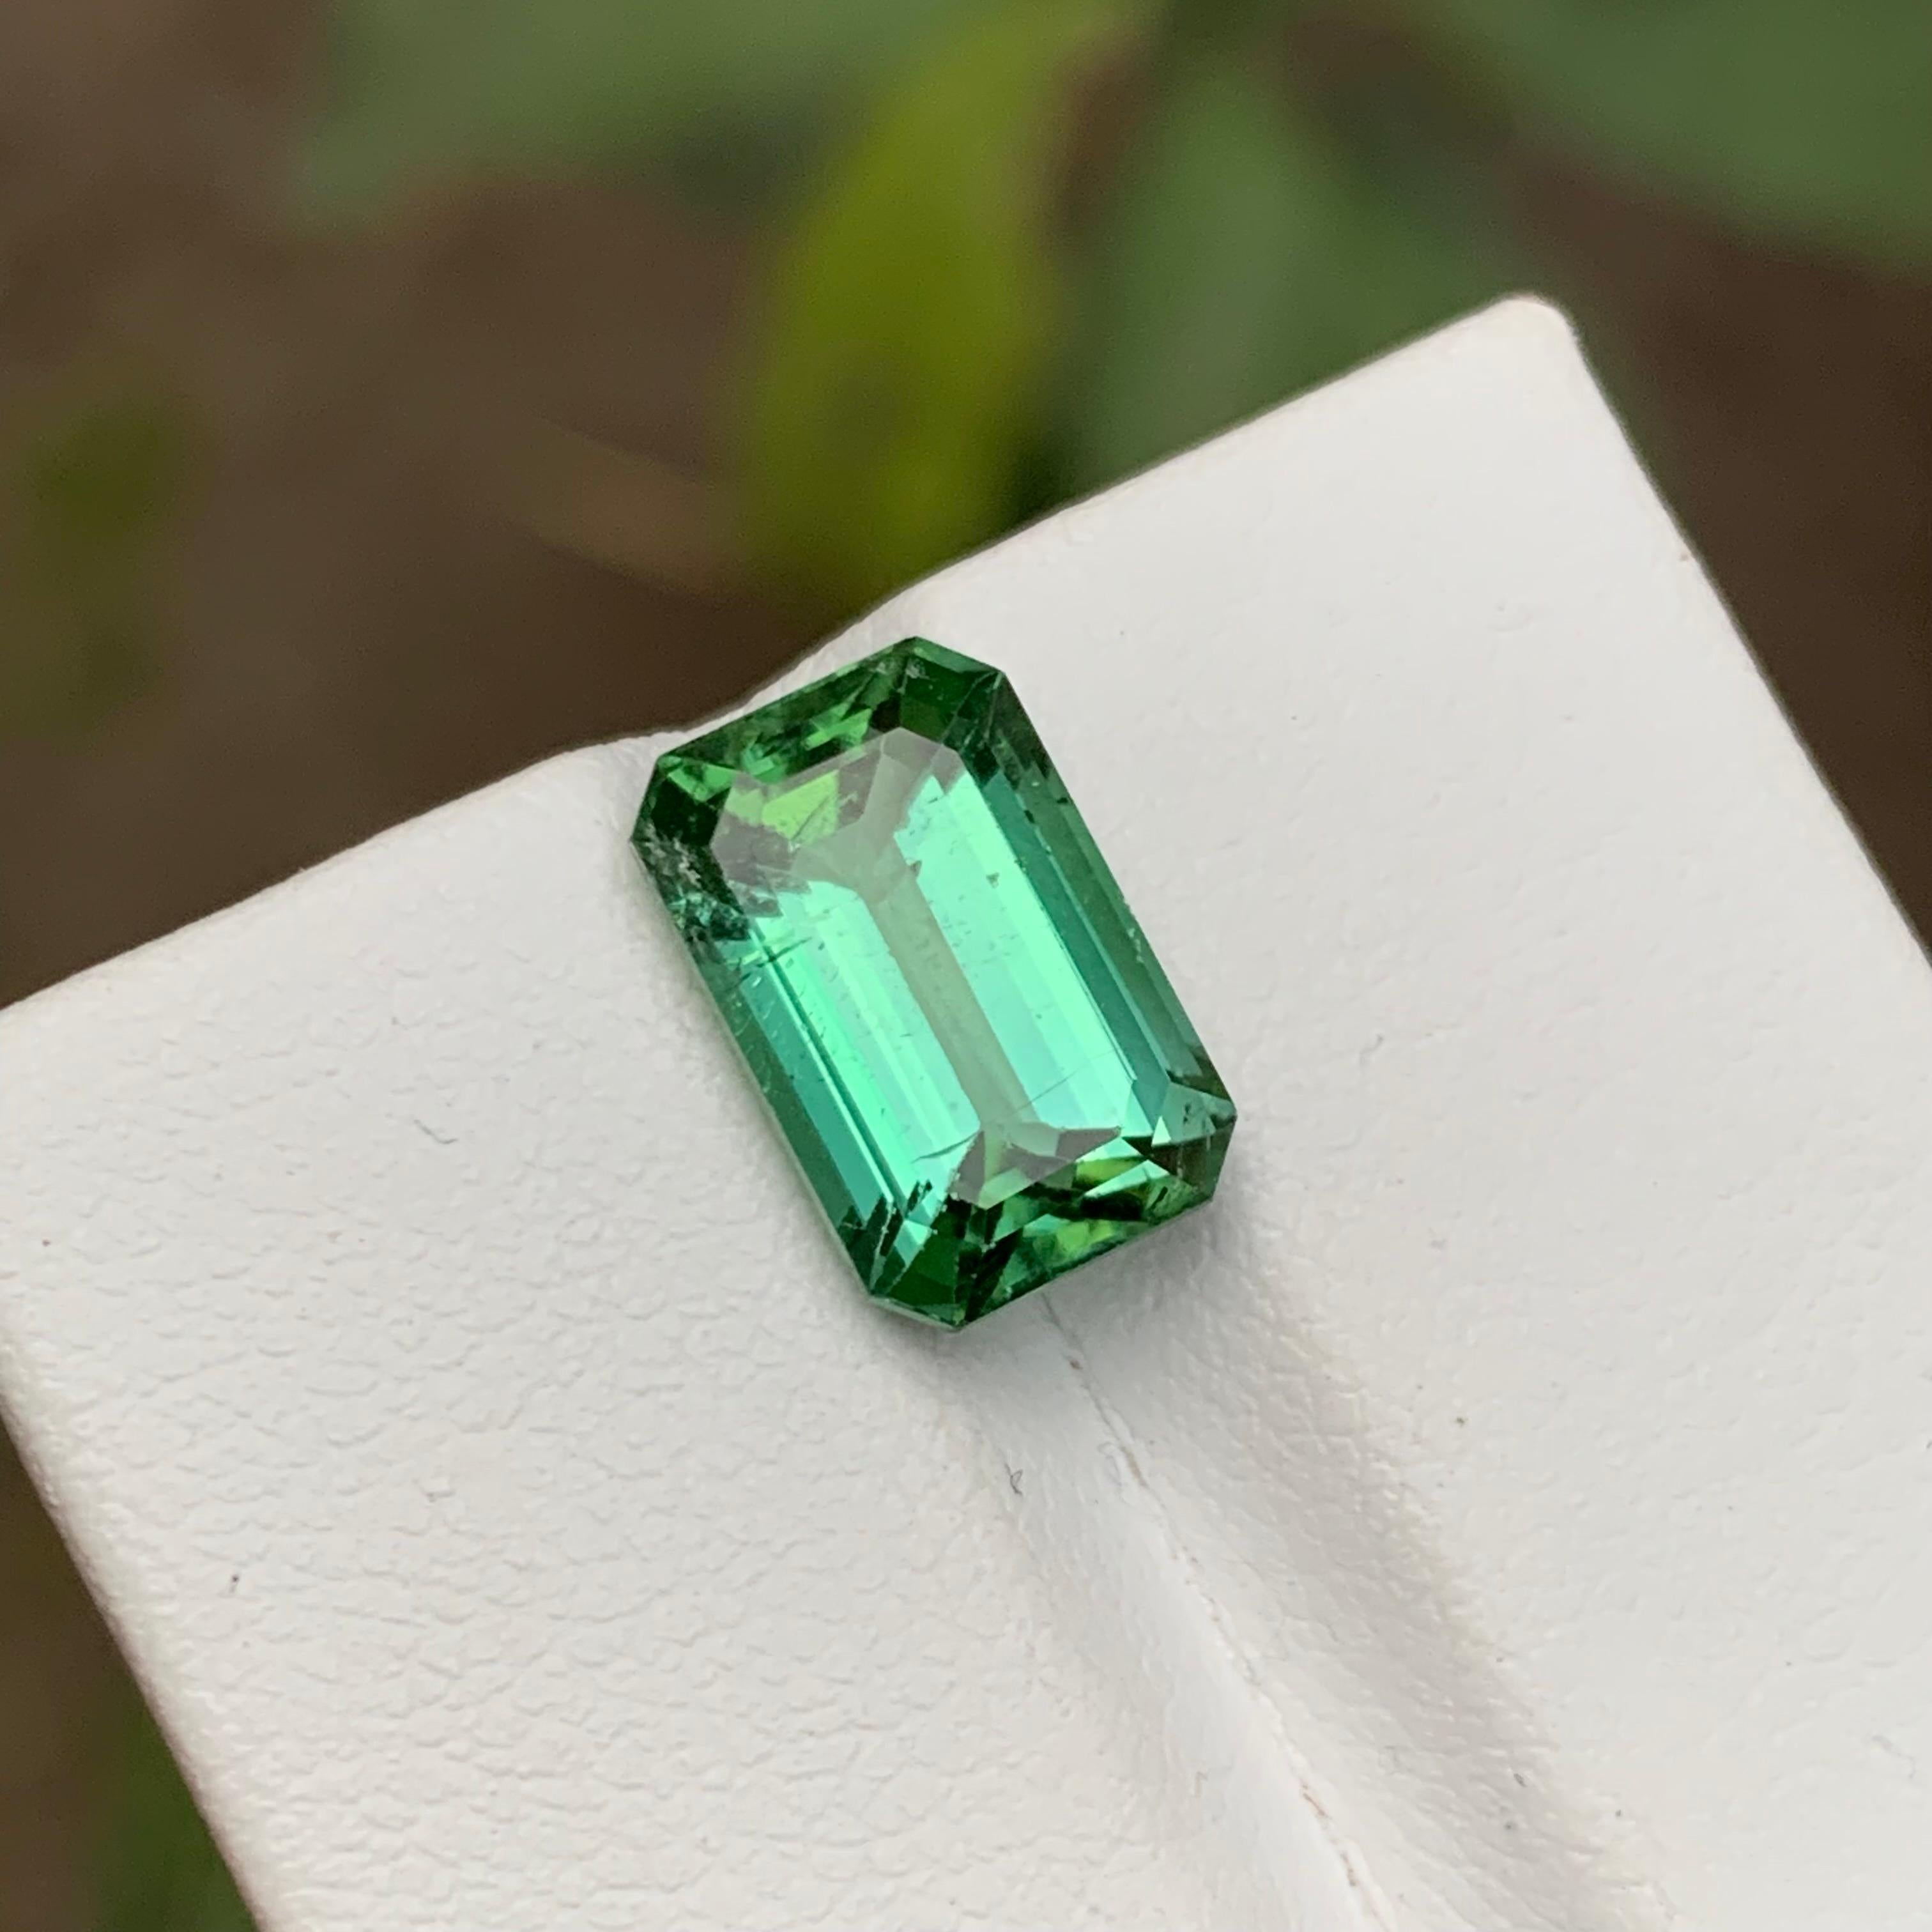 GEMSTONE TYPE: Tourmaline
PIECE(S): 1
WEIGHT: 4.80 Carats
SHAPE: Step Emerald Cut
SIZE (MM): 11.92 x 7.74 x 6.01
COLOR: Green
CLARITY: Slightly Included 
TREATMENT: None
ORIGIN: Afghanistan
CERTIFICATE: On demand

Elevate your ensemble with our